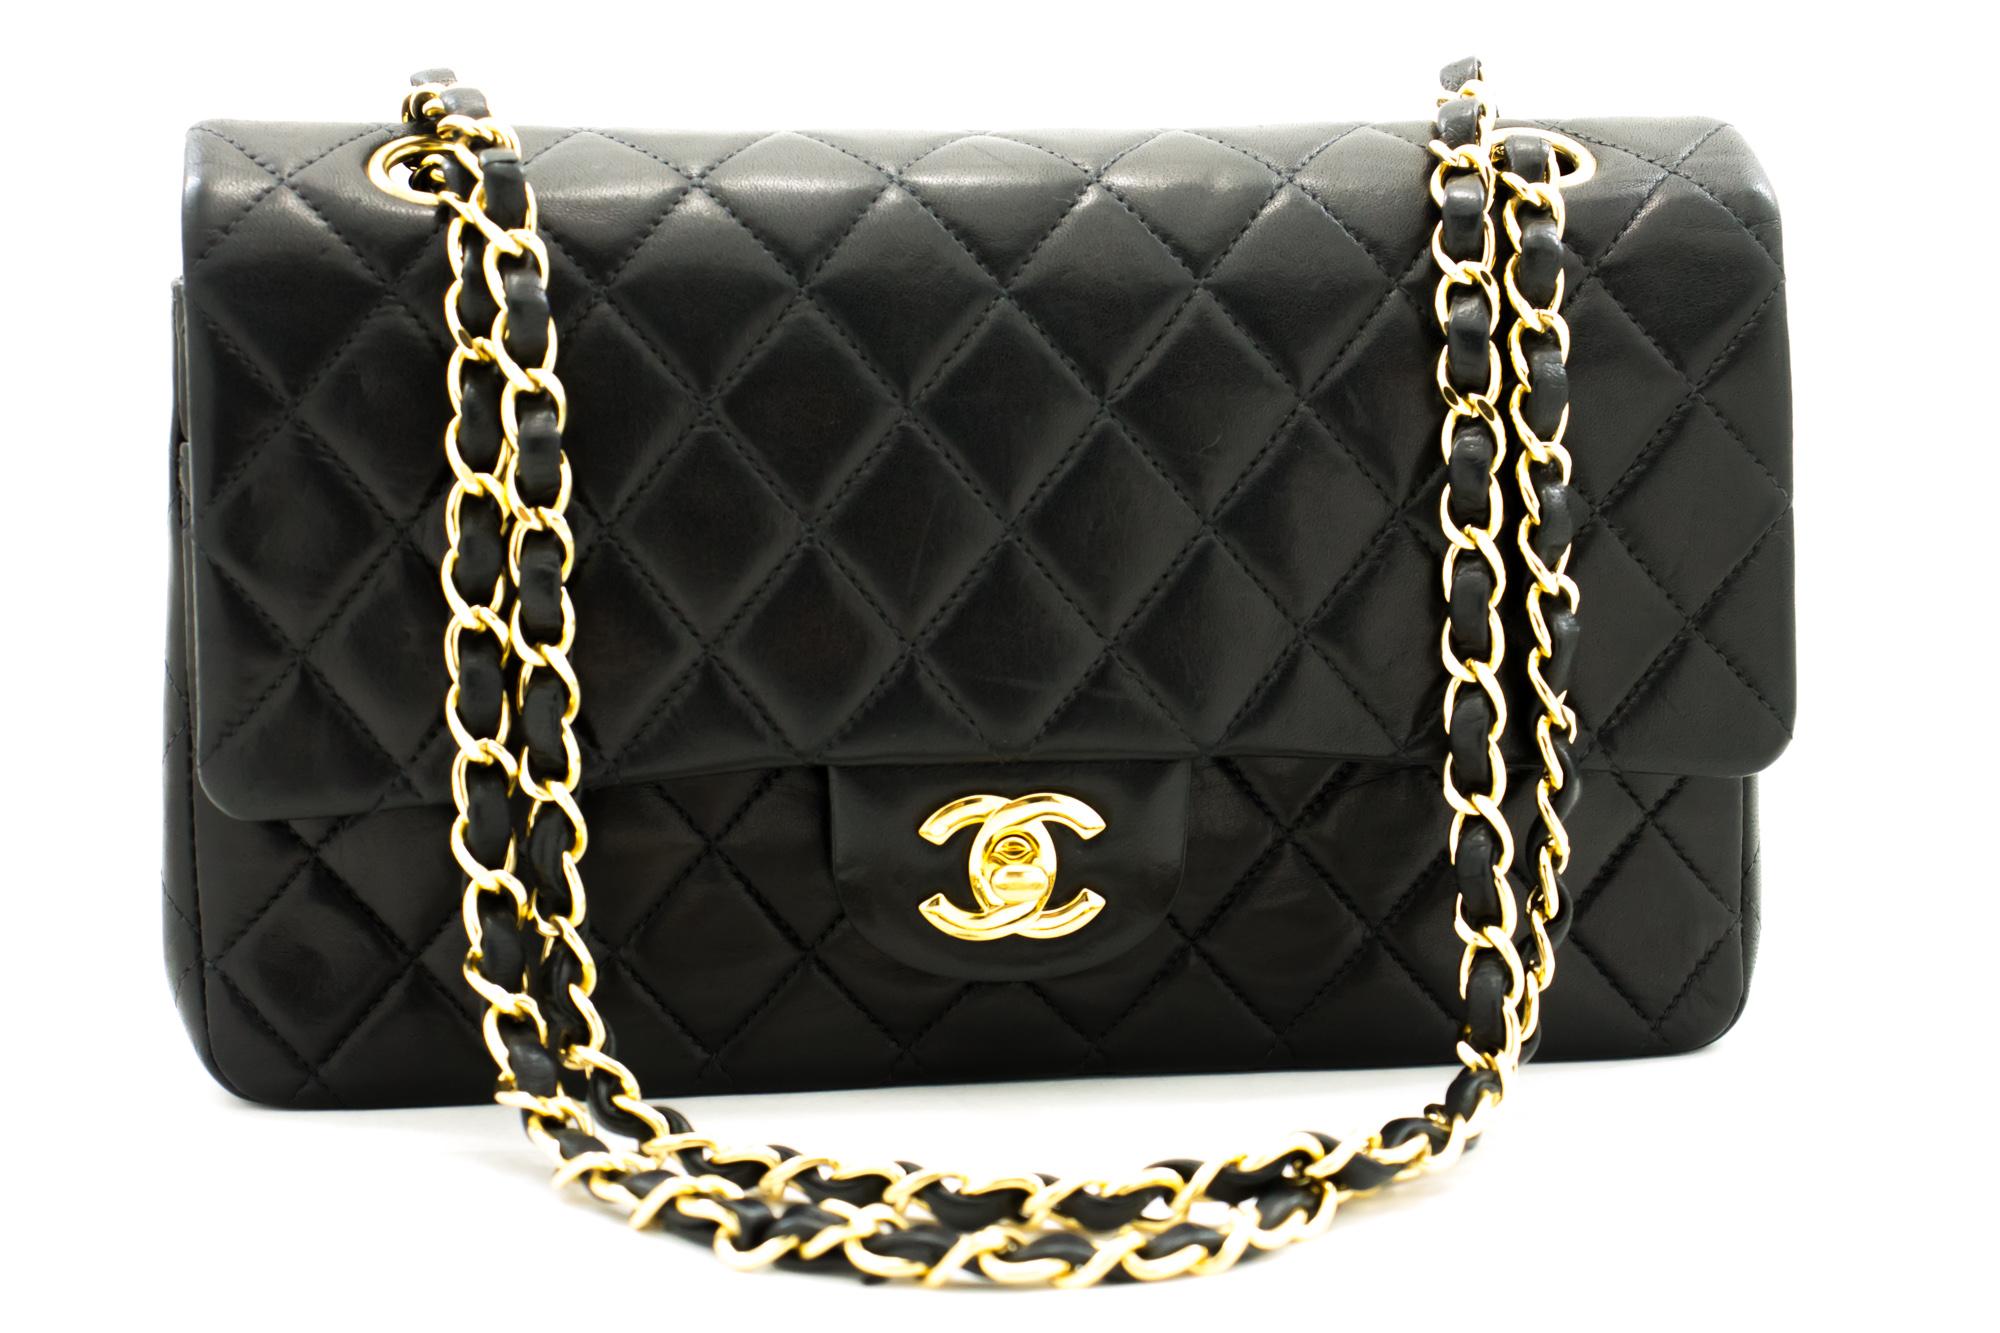 An authentic CHANEL 2.55 Classic Double Flap Medium Chain Shoulder Bag Black made of black Lambskin. The color is Black. The outside material is Leather. The pattern is Solid. This item is Contemporary. The year of manufacture would be 2000-2 0 0 2